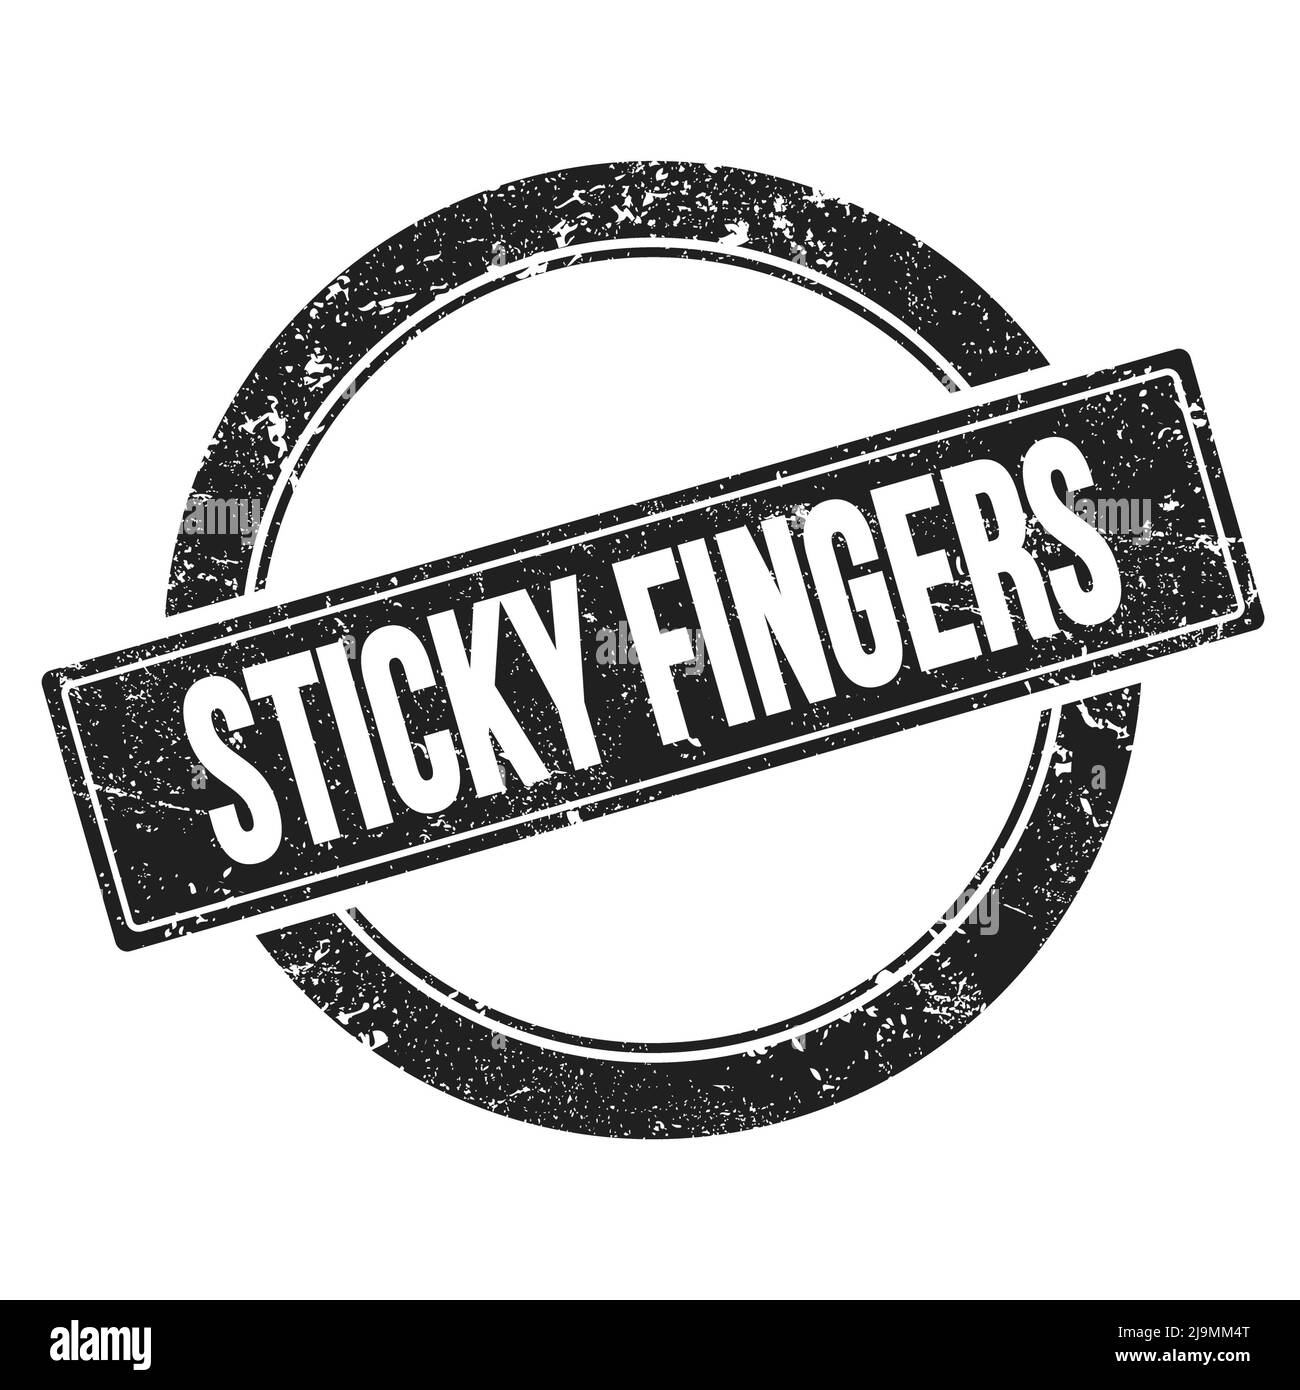 STICKY FINGERS text on black grungy round stamp. Stock Photo